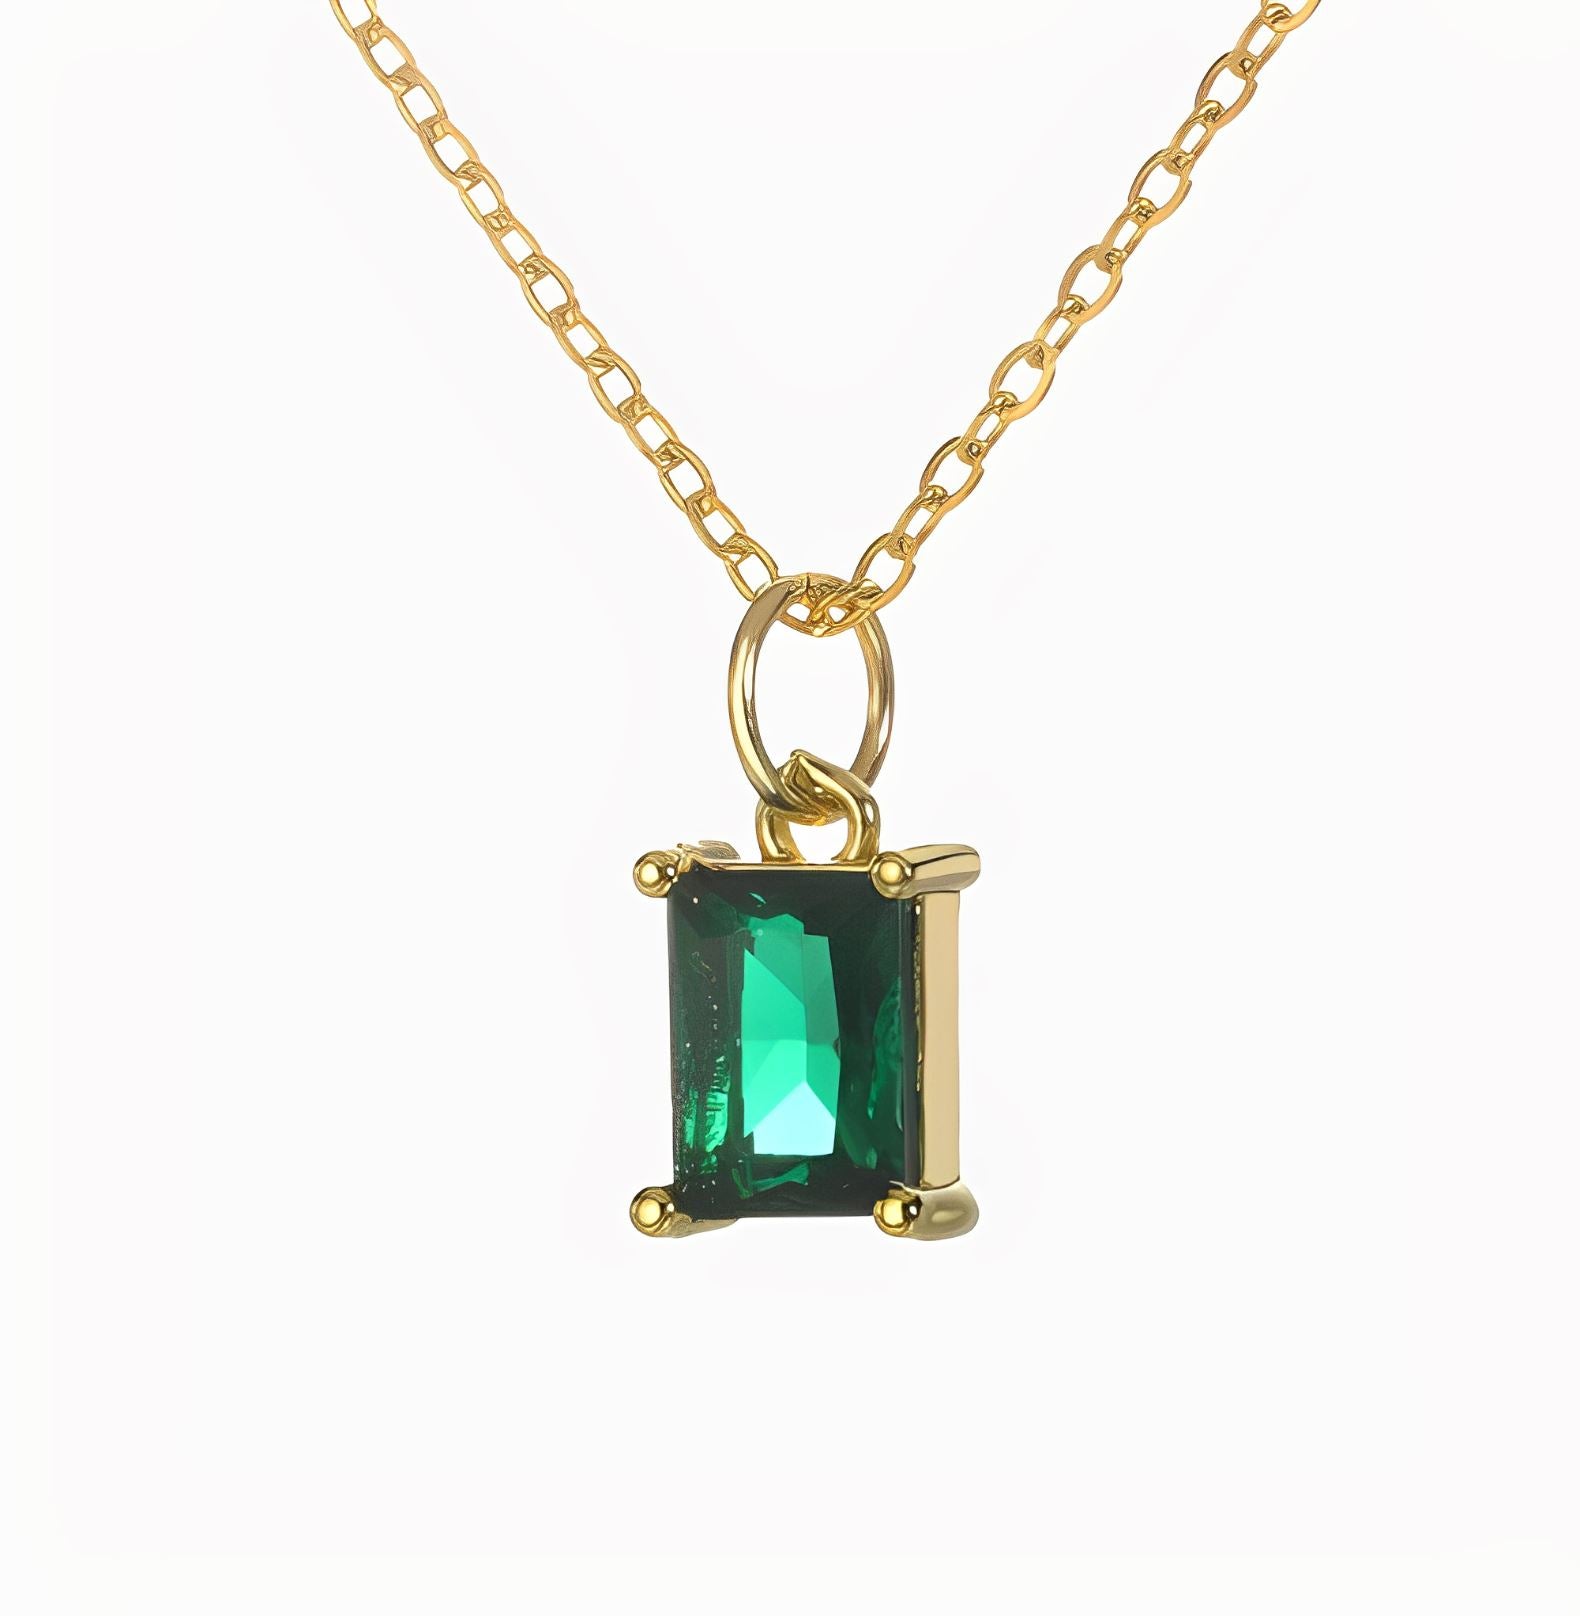 FLORENCE NECKLACE neck Yubama Jewelry Online Store - The Elegant Designs of Gold and Silver ! Green 